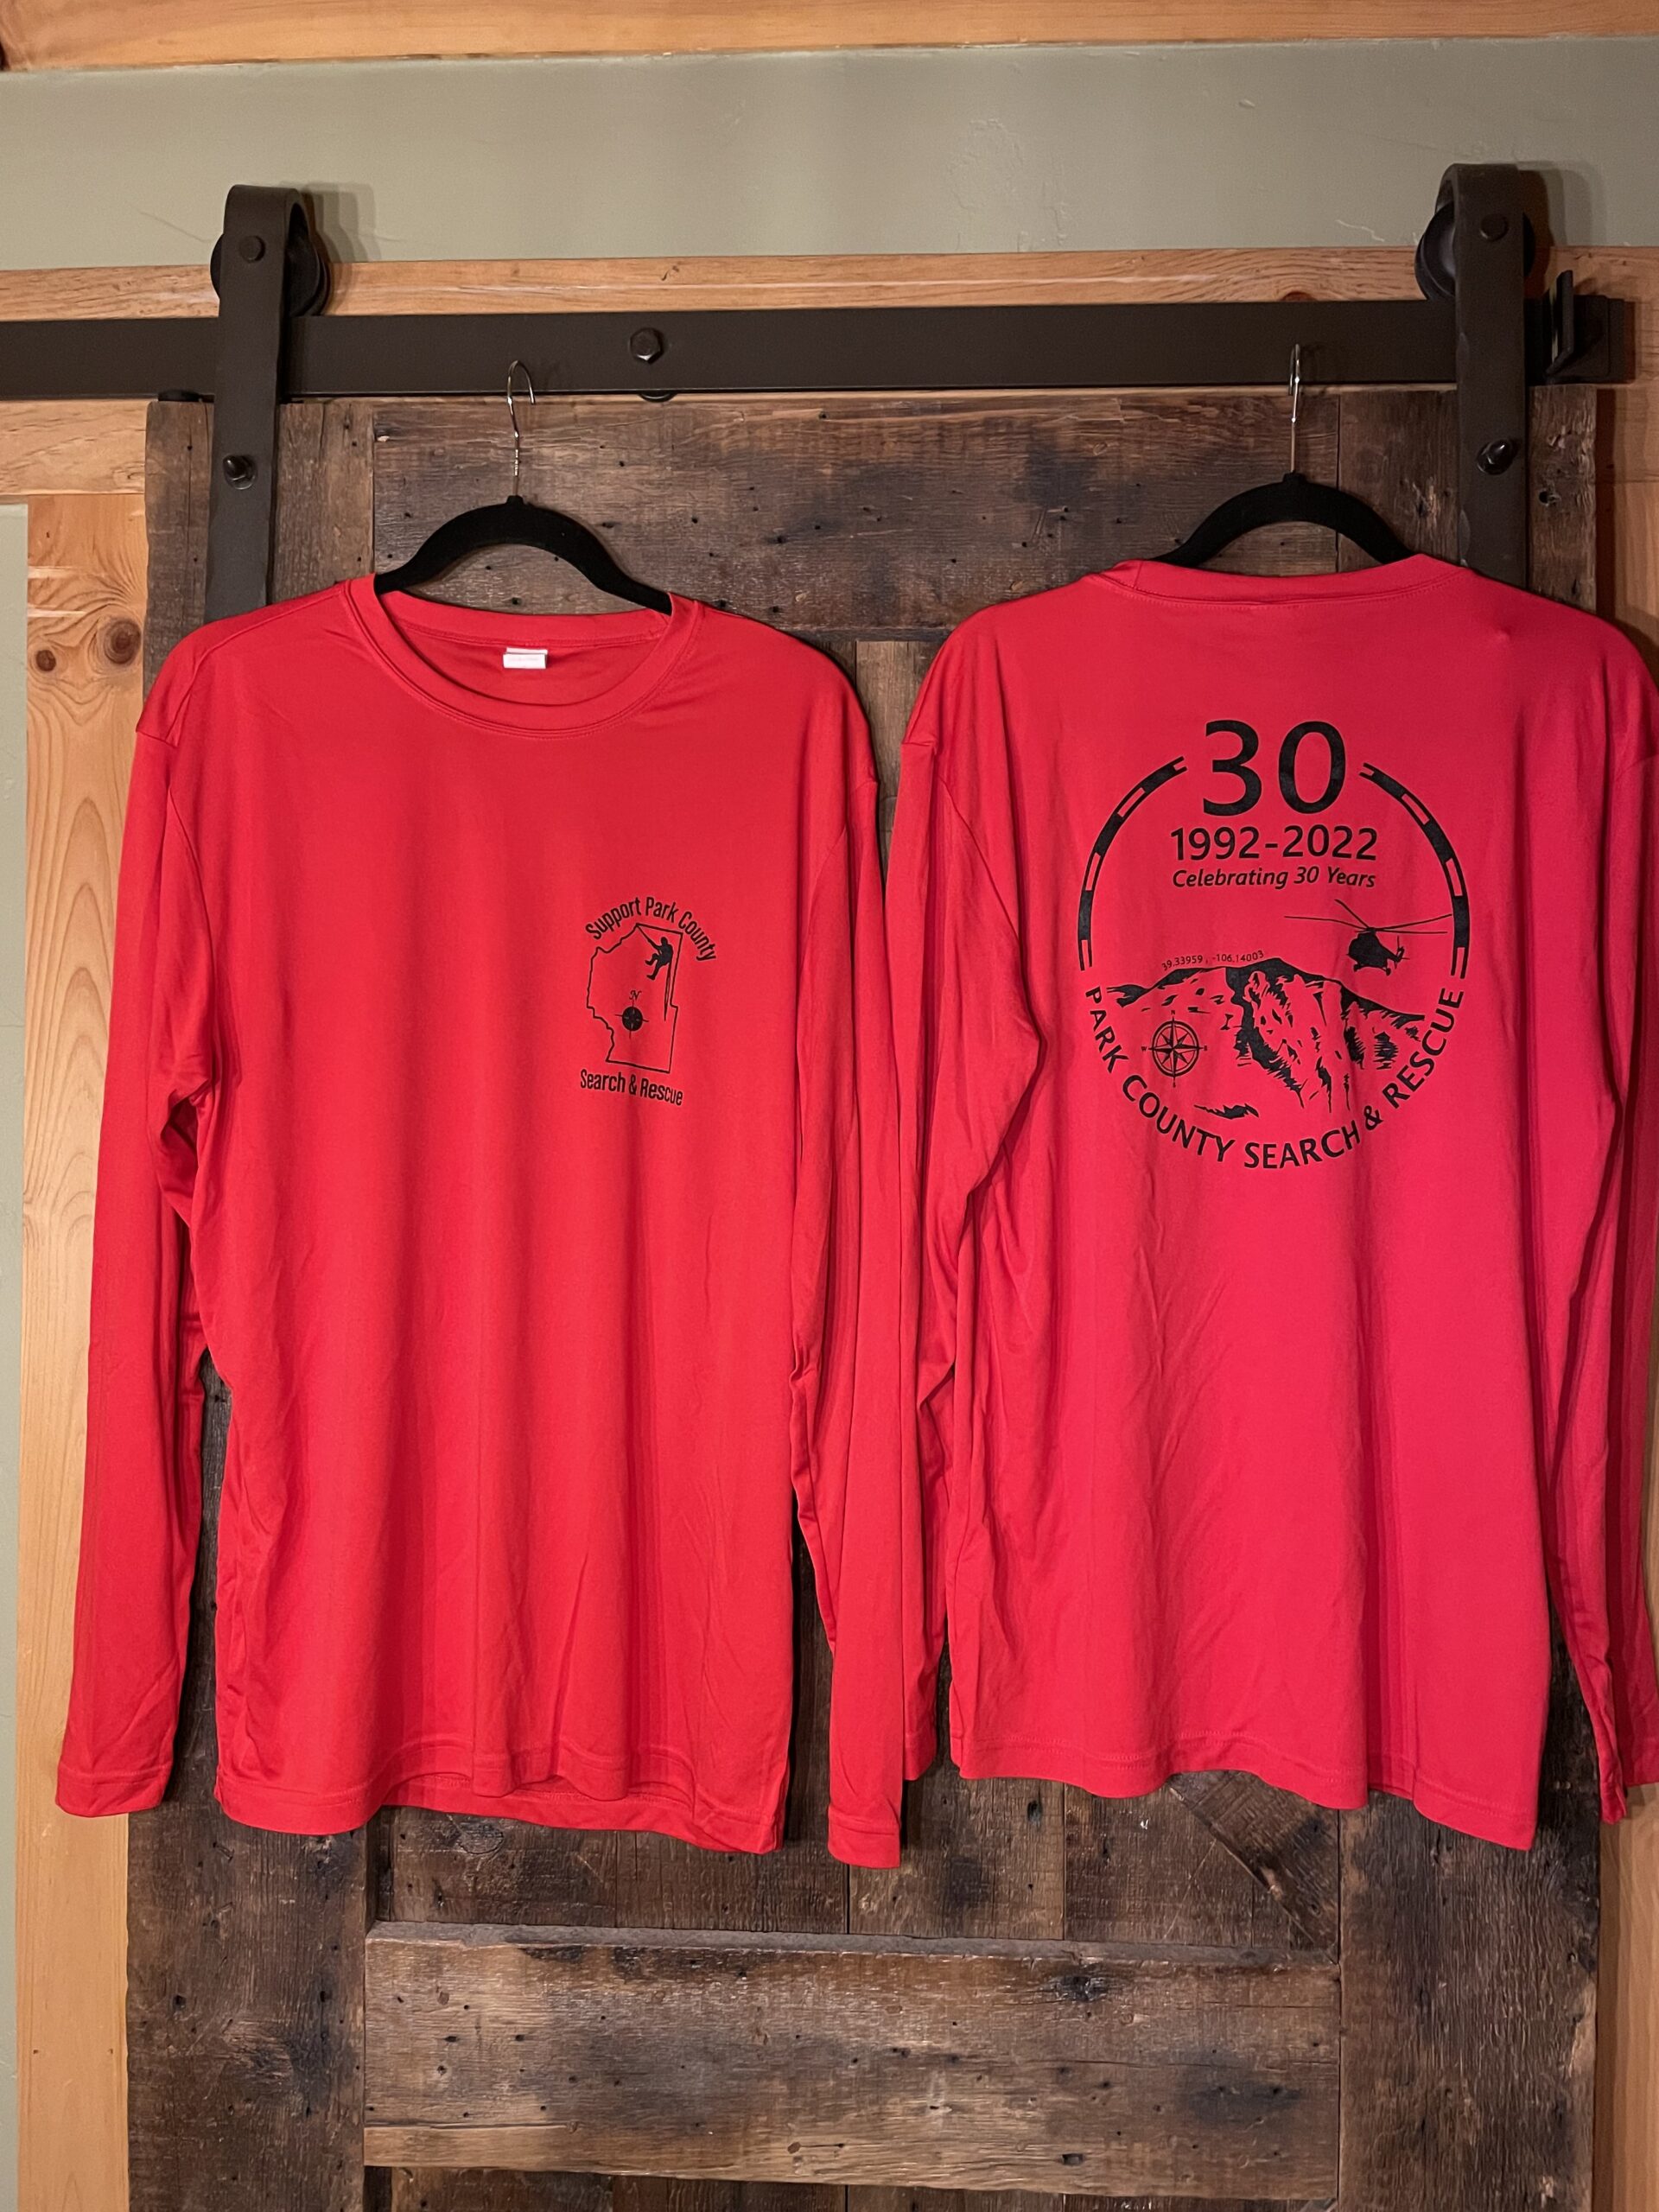 Celebrating 30 Years - RED (XL) Long Sleeve